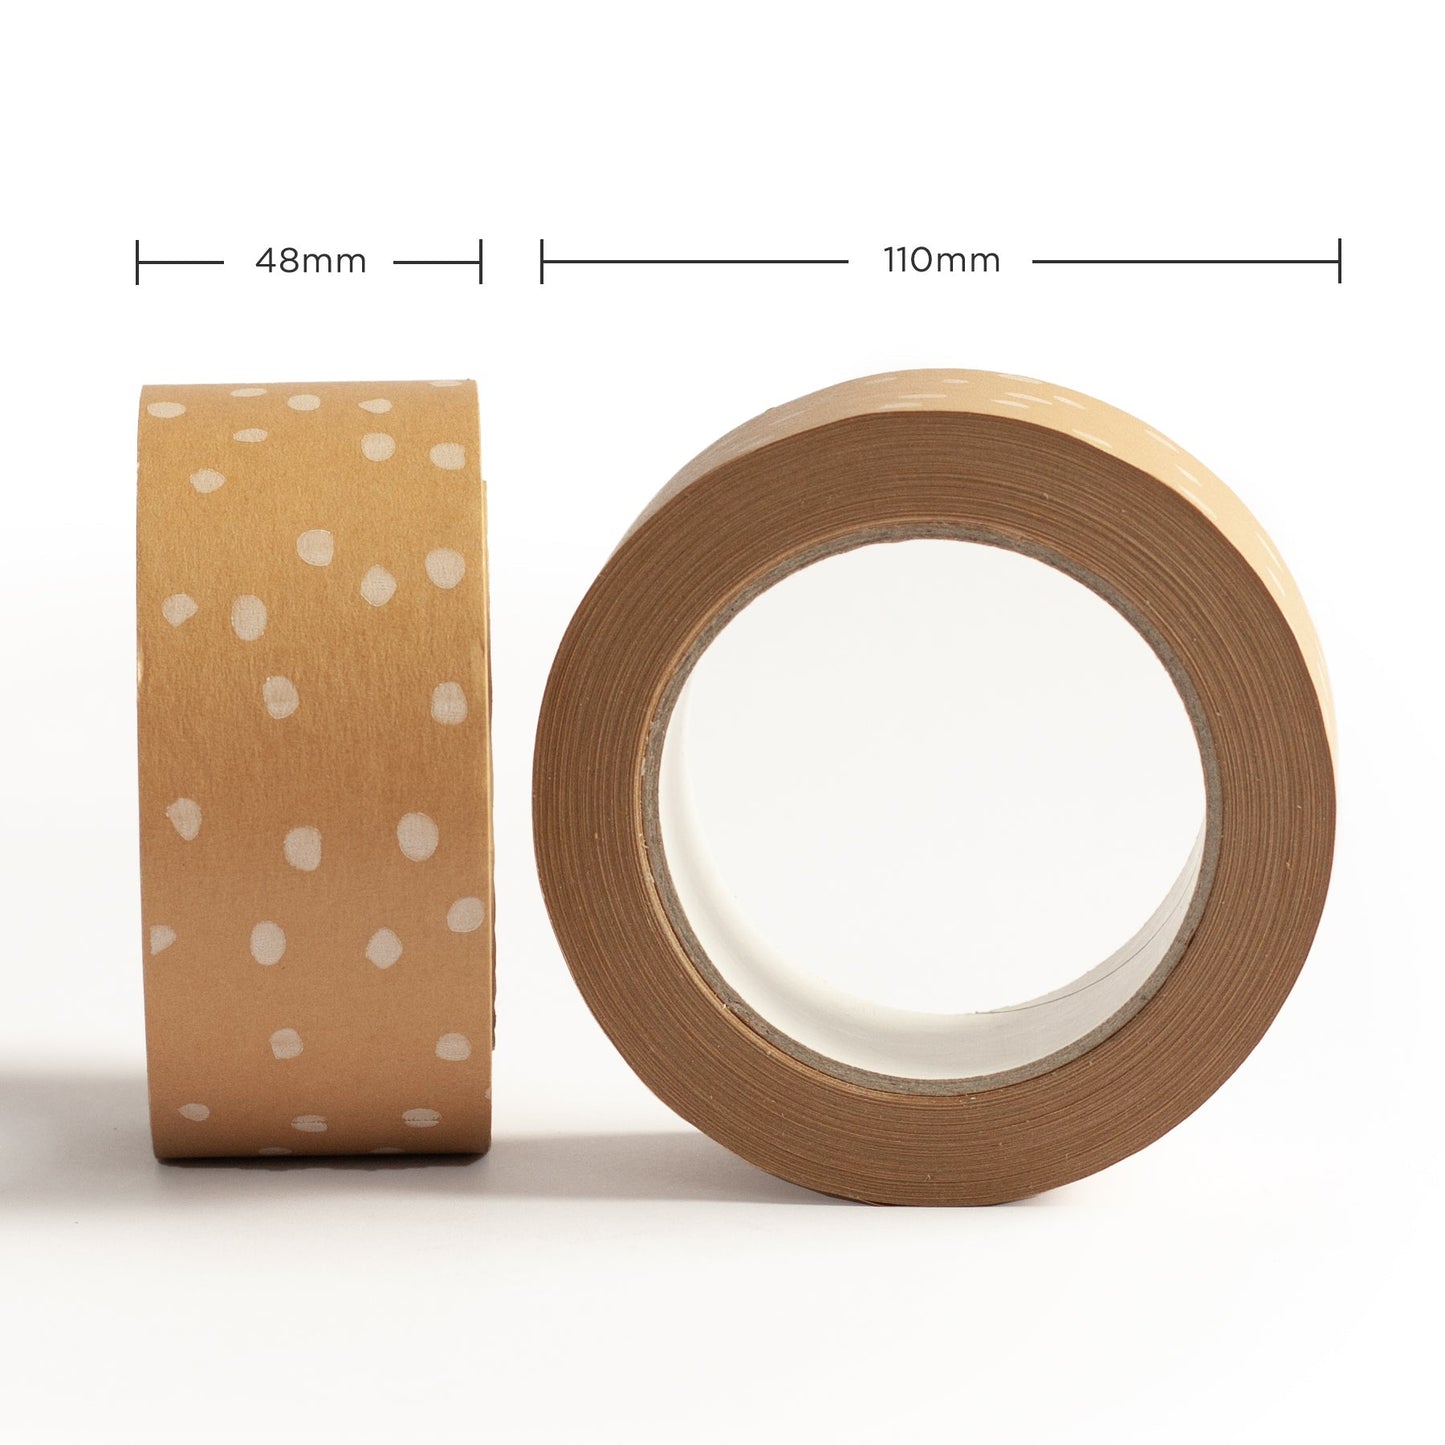 Decorative paper tapes, any 36 of your choice, 50 metres length, 48mm width